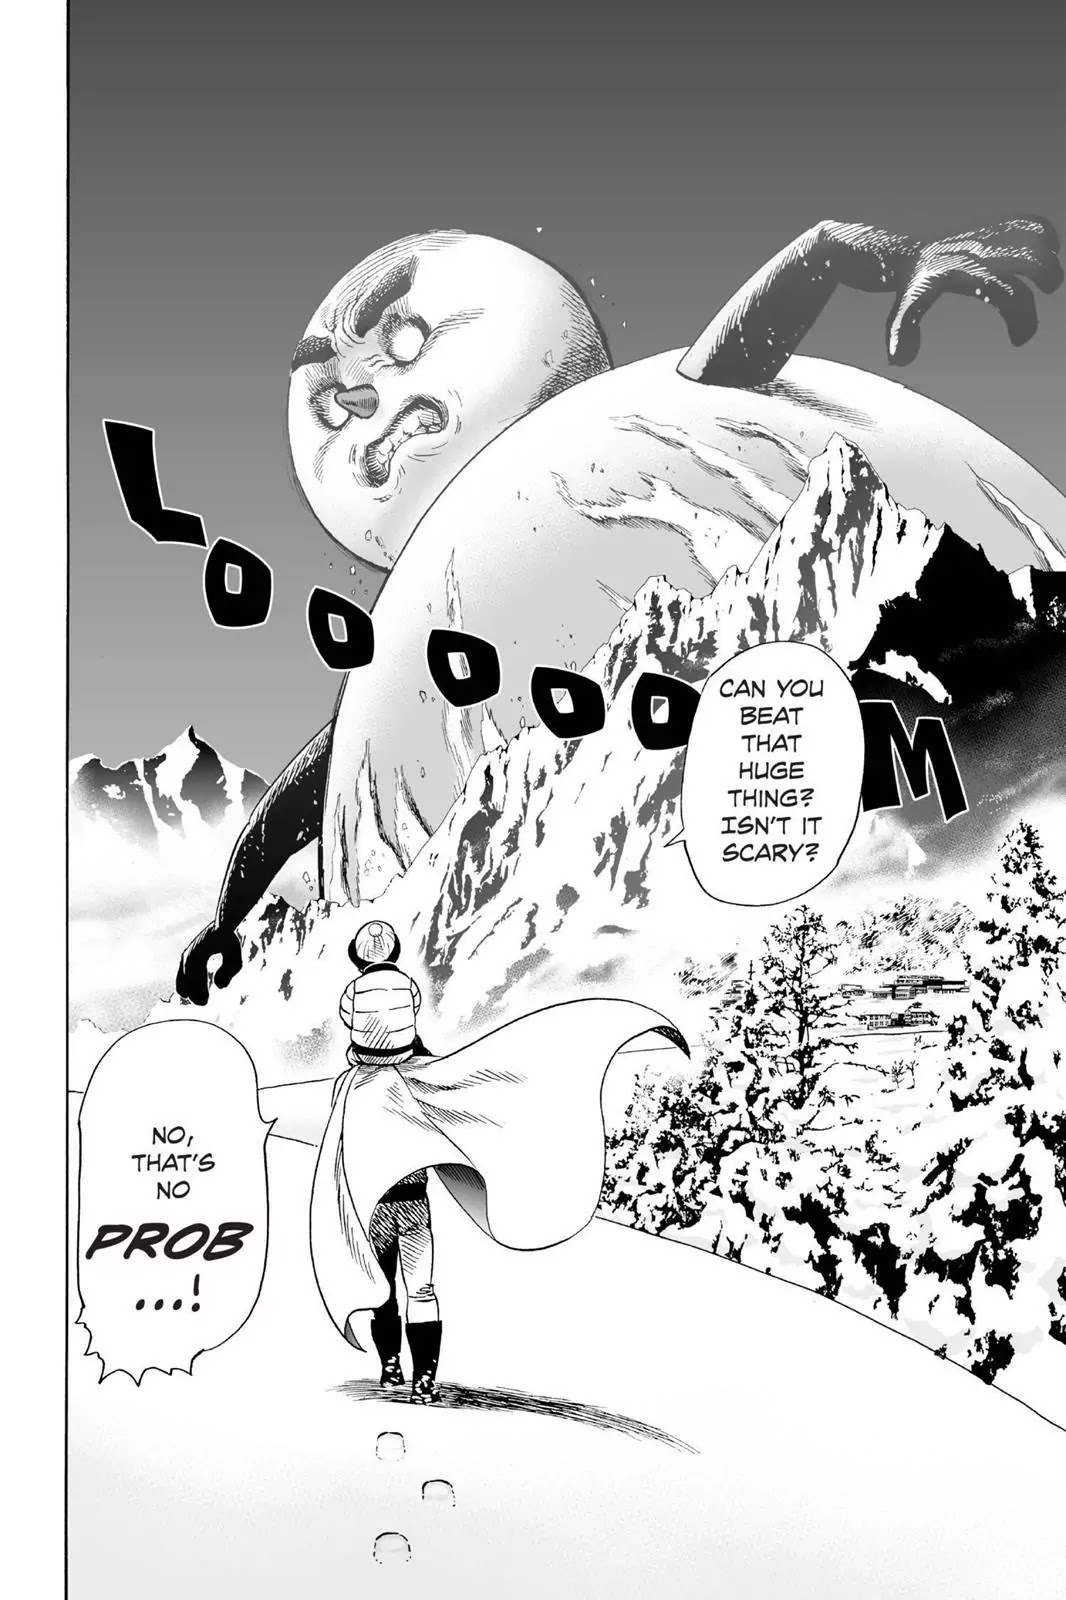 One Punch Man, Chapter 8.5  Extra Chapter 200 Yen image 22